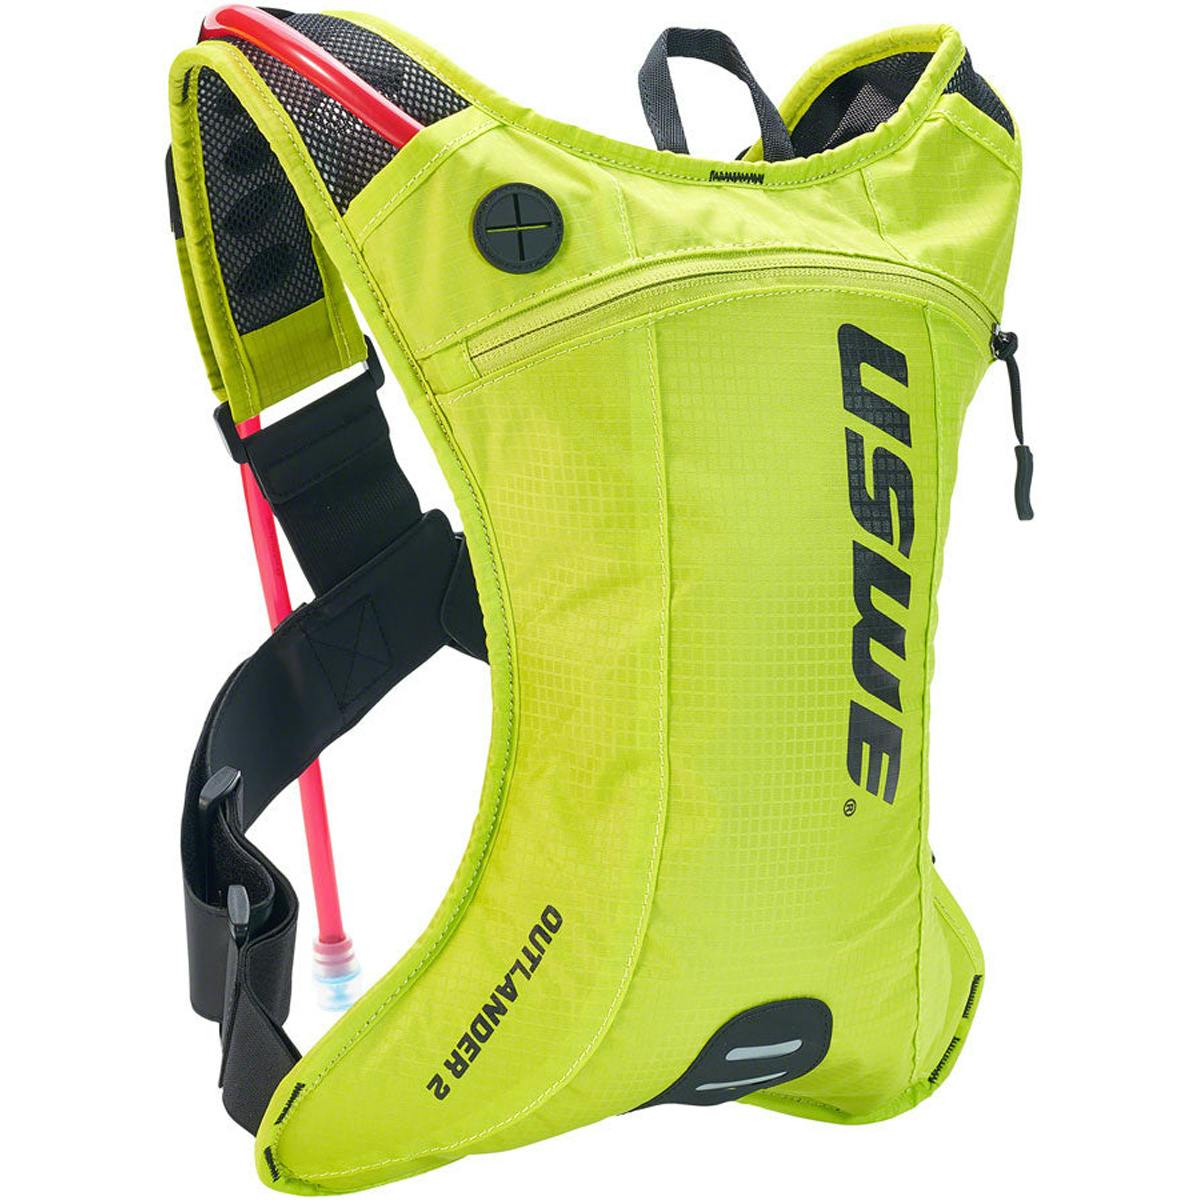 USWE Outlander 2 Hydration Pack - Crazy Yellow - 2L